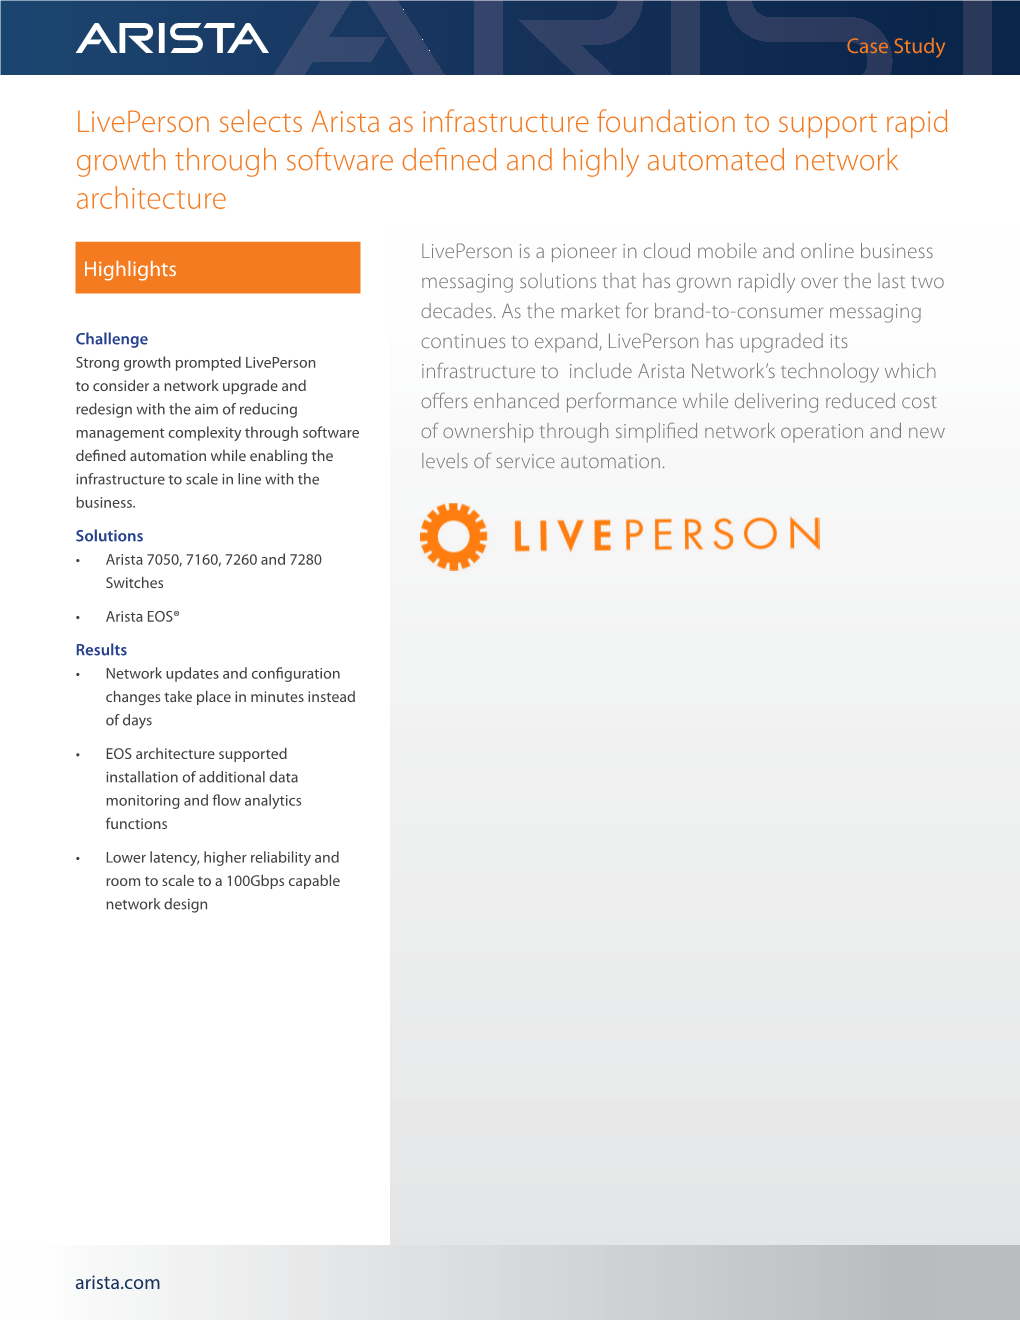 Liveperson Selects Arista As Infrastructure Foundation to Support Rapid Growth Through Software Defined and Highly Automated Network Architecture